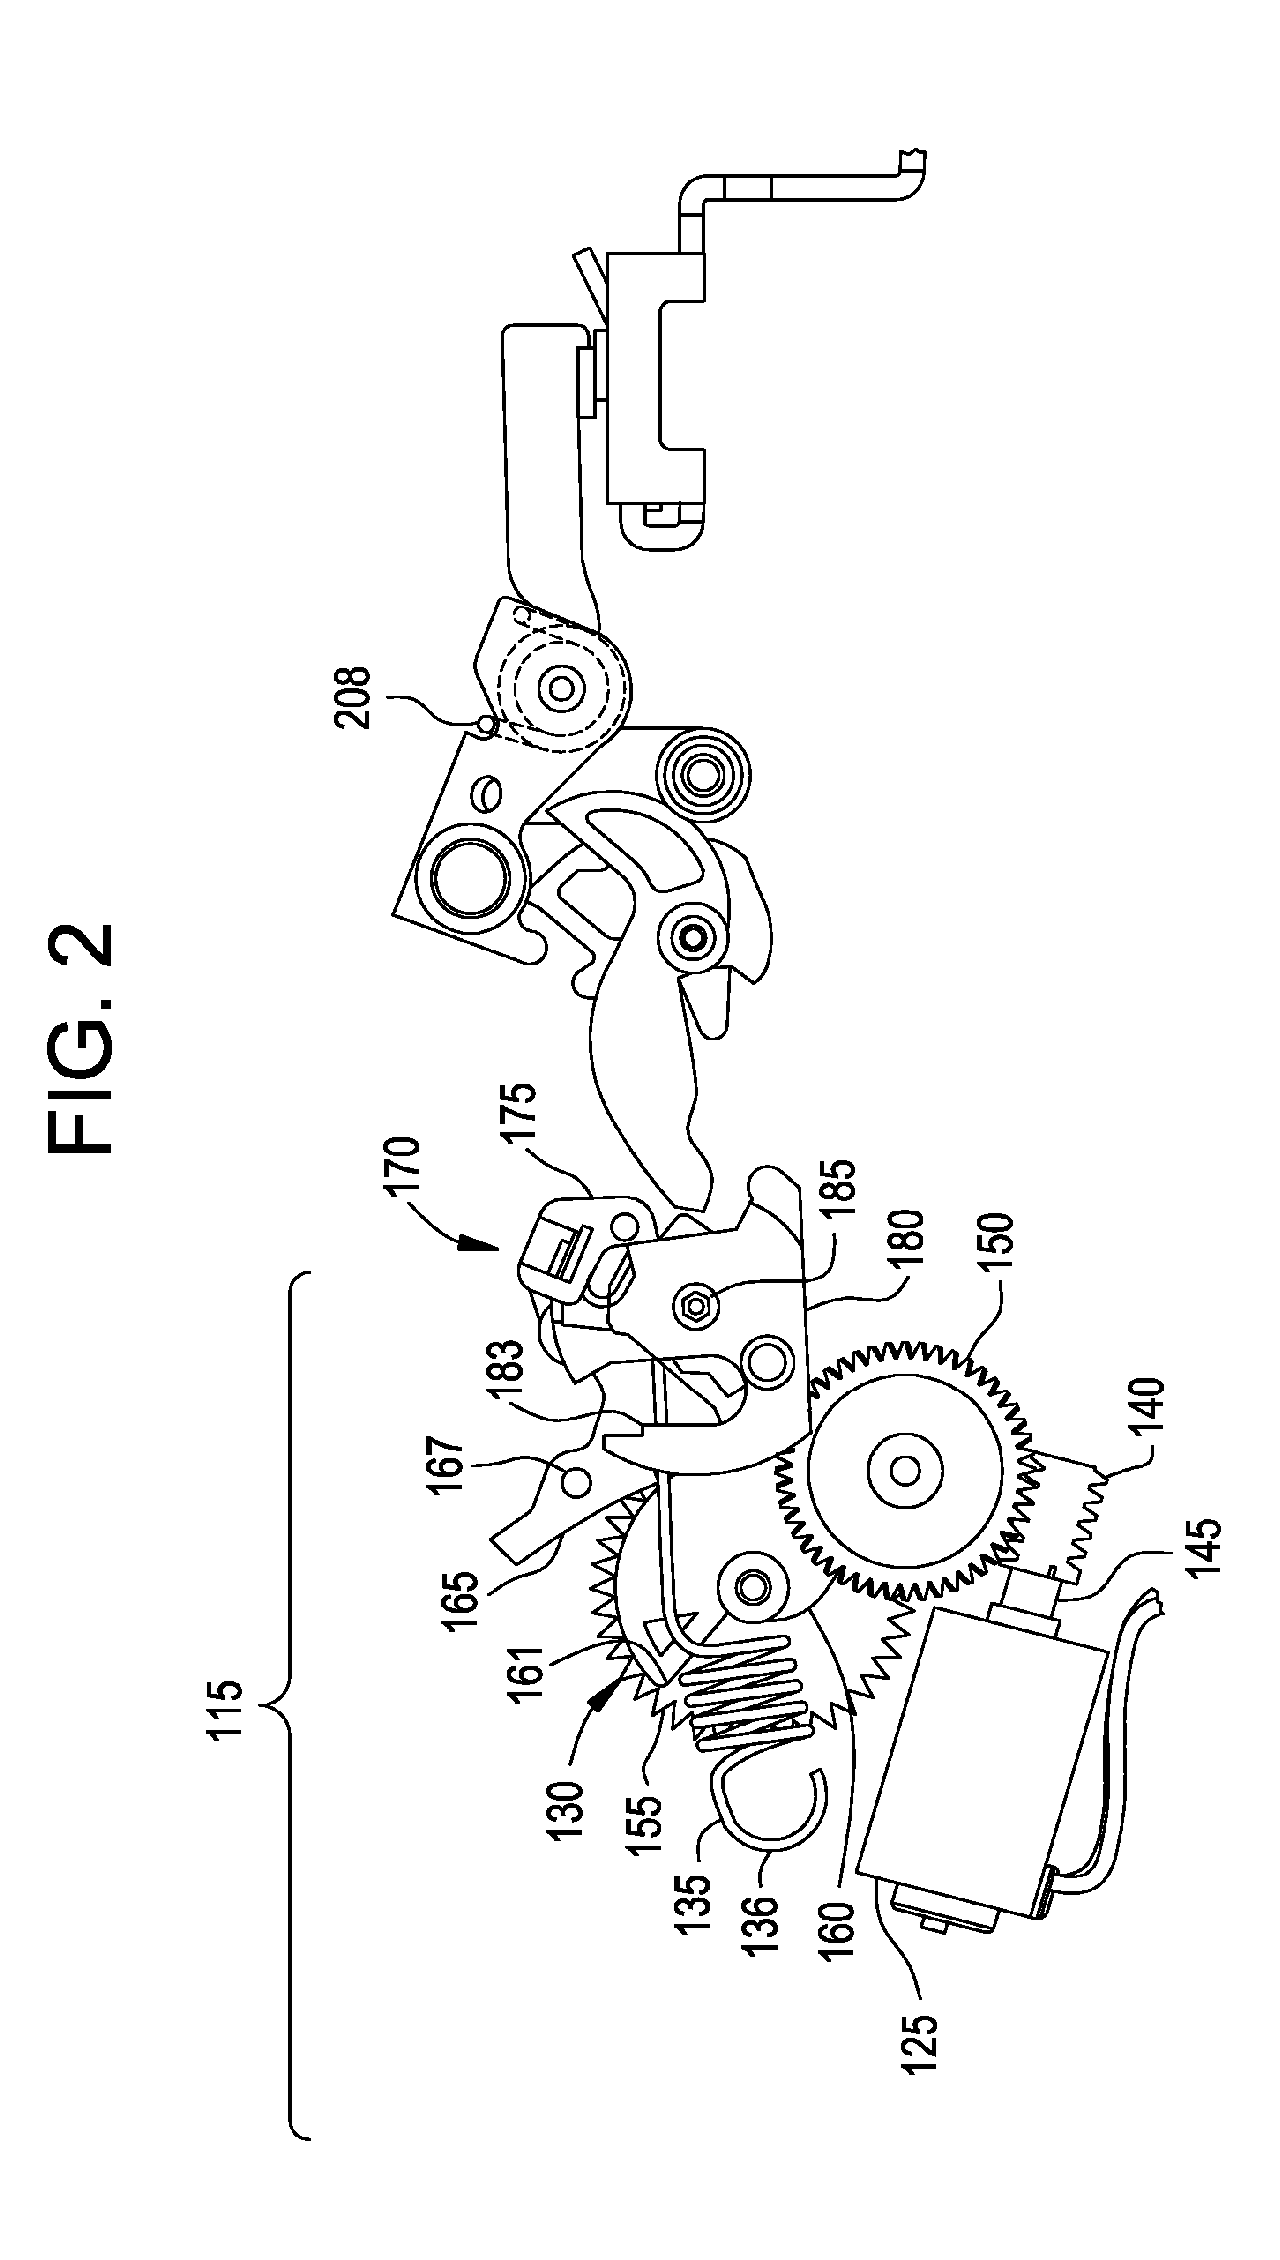 Circuit breaker configured to be remotely operated